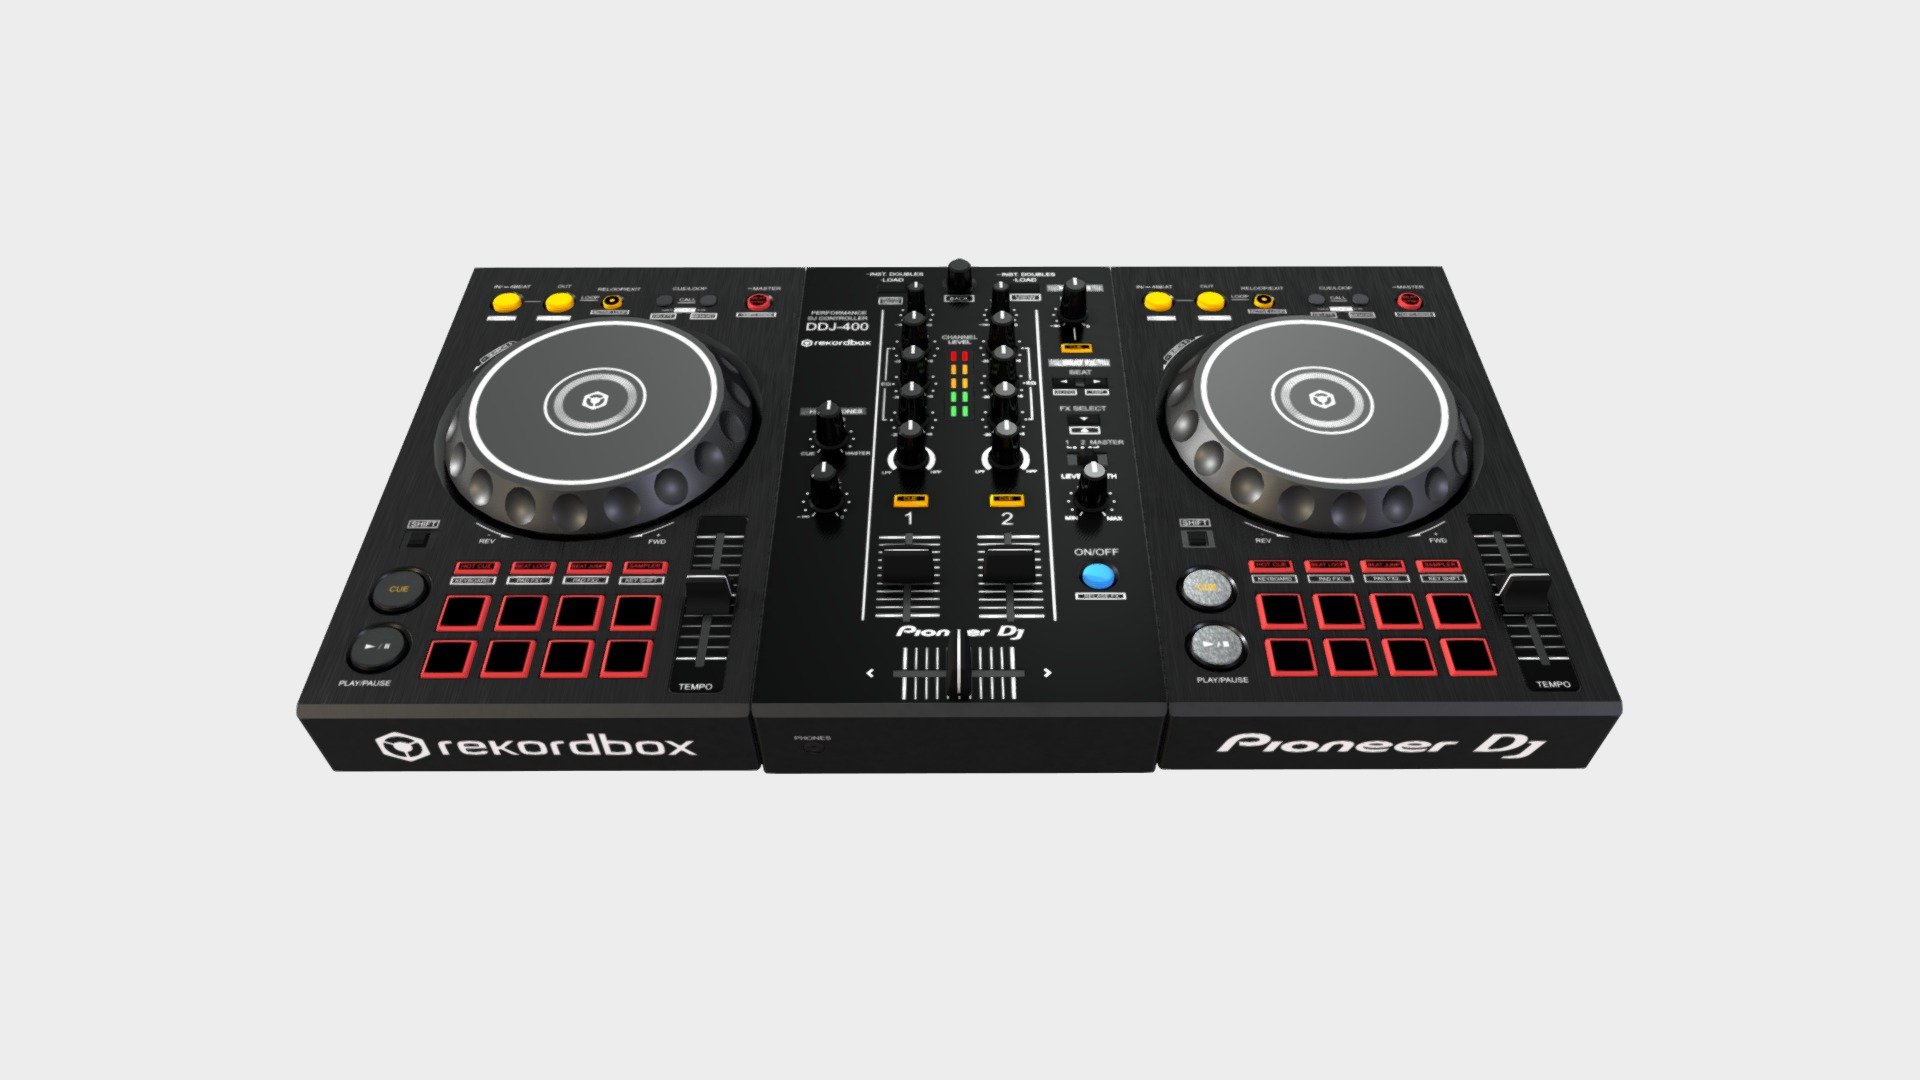 Pioneer Dj Controller DDJ-400, HighPoly with 4k textures. UV maps included. FBX formats.

Real size object: 27cmx48cmx5cm

TextureMaps:




BaseColor

Roughness

Metallic

NormalMap

HeighMap
 - Pioneer Dj Controller DDJ-400 Rekordbox - Buy Royalty Free 3D model by Filipe Lopes (@filipeblopes) 3d model